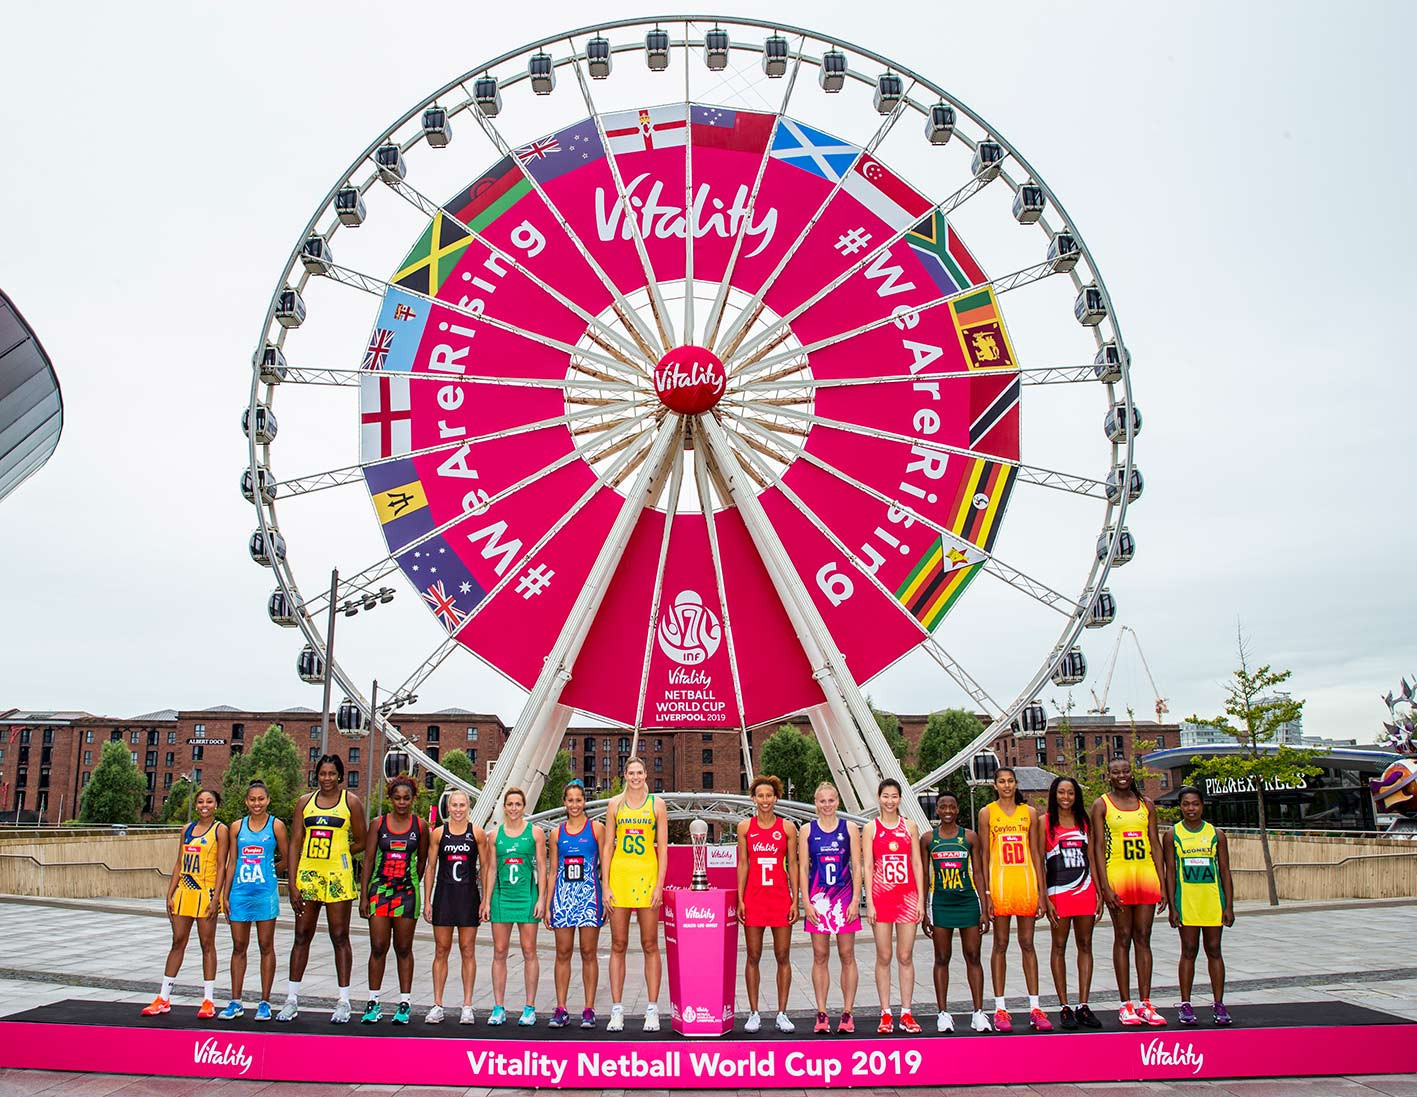 Stage set for Netball World Cup in Liverpool as hosts bid for first title